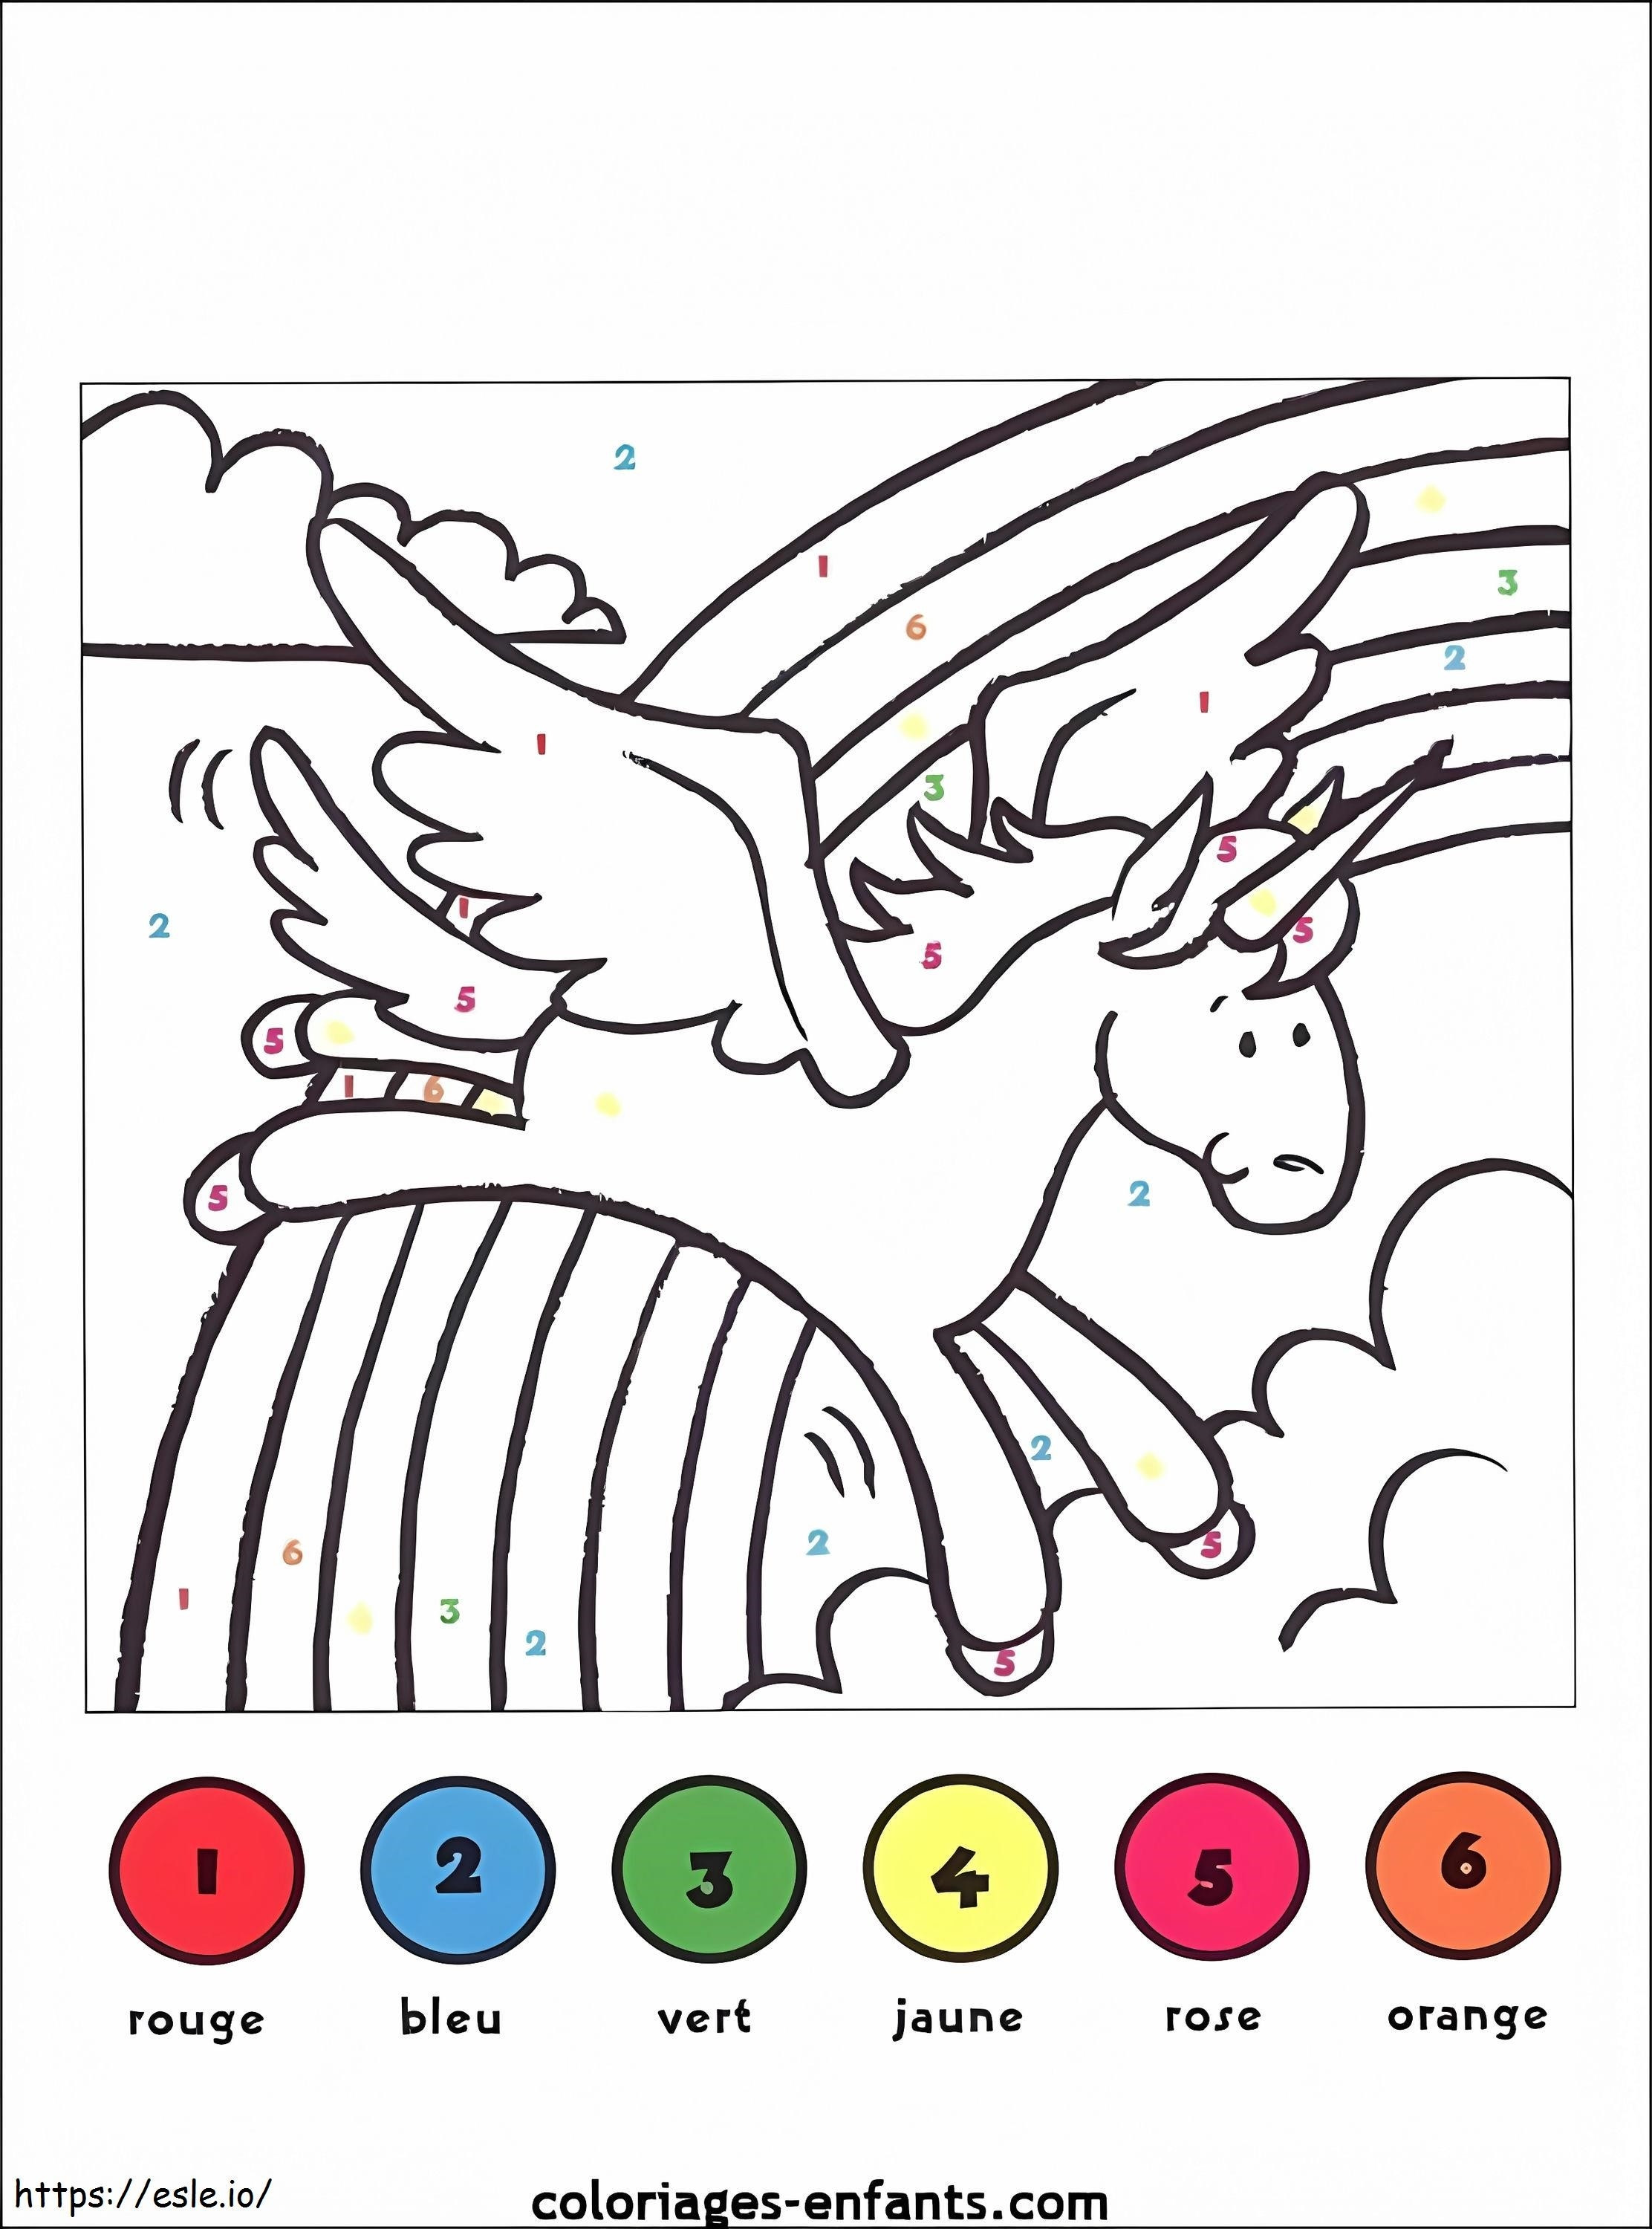 Magical Unicorn 12 coloring page